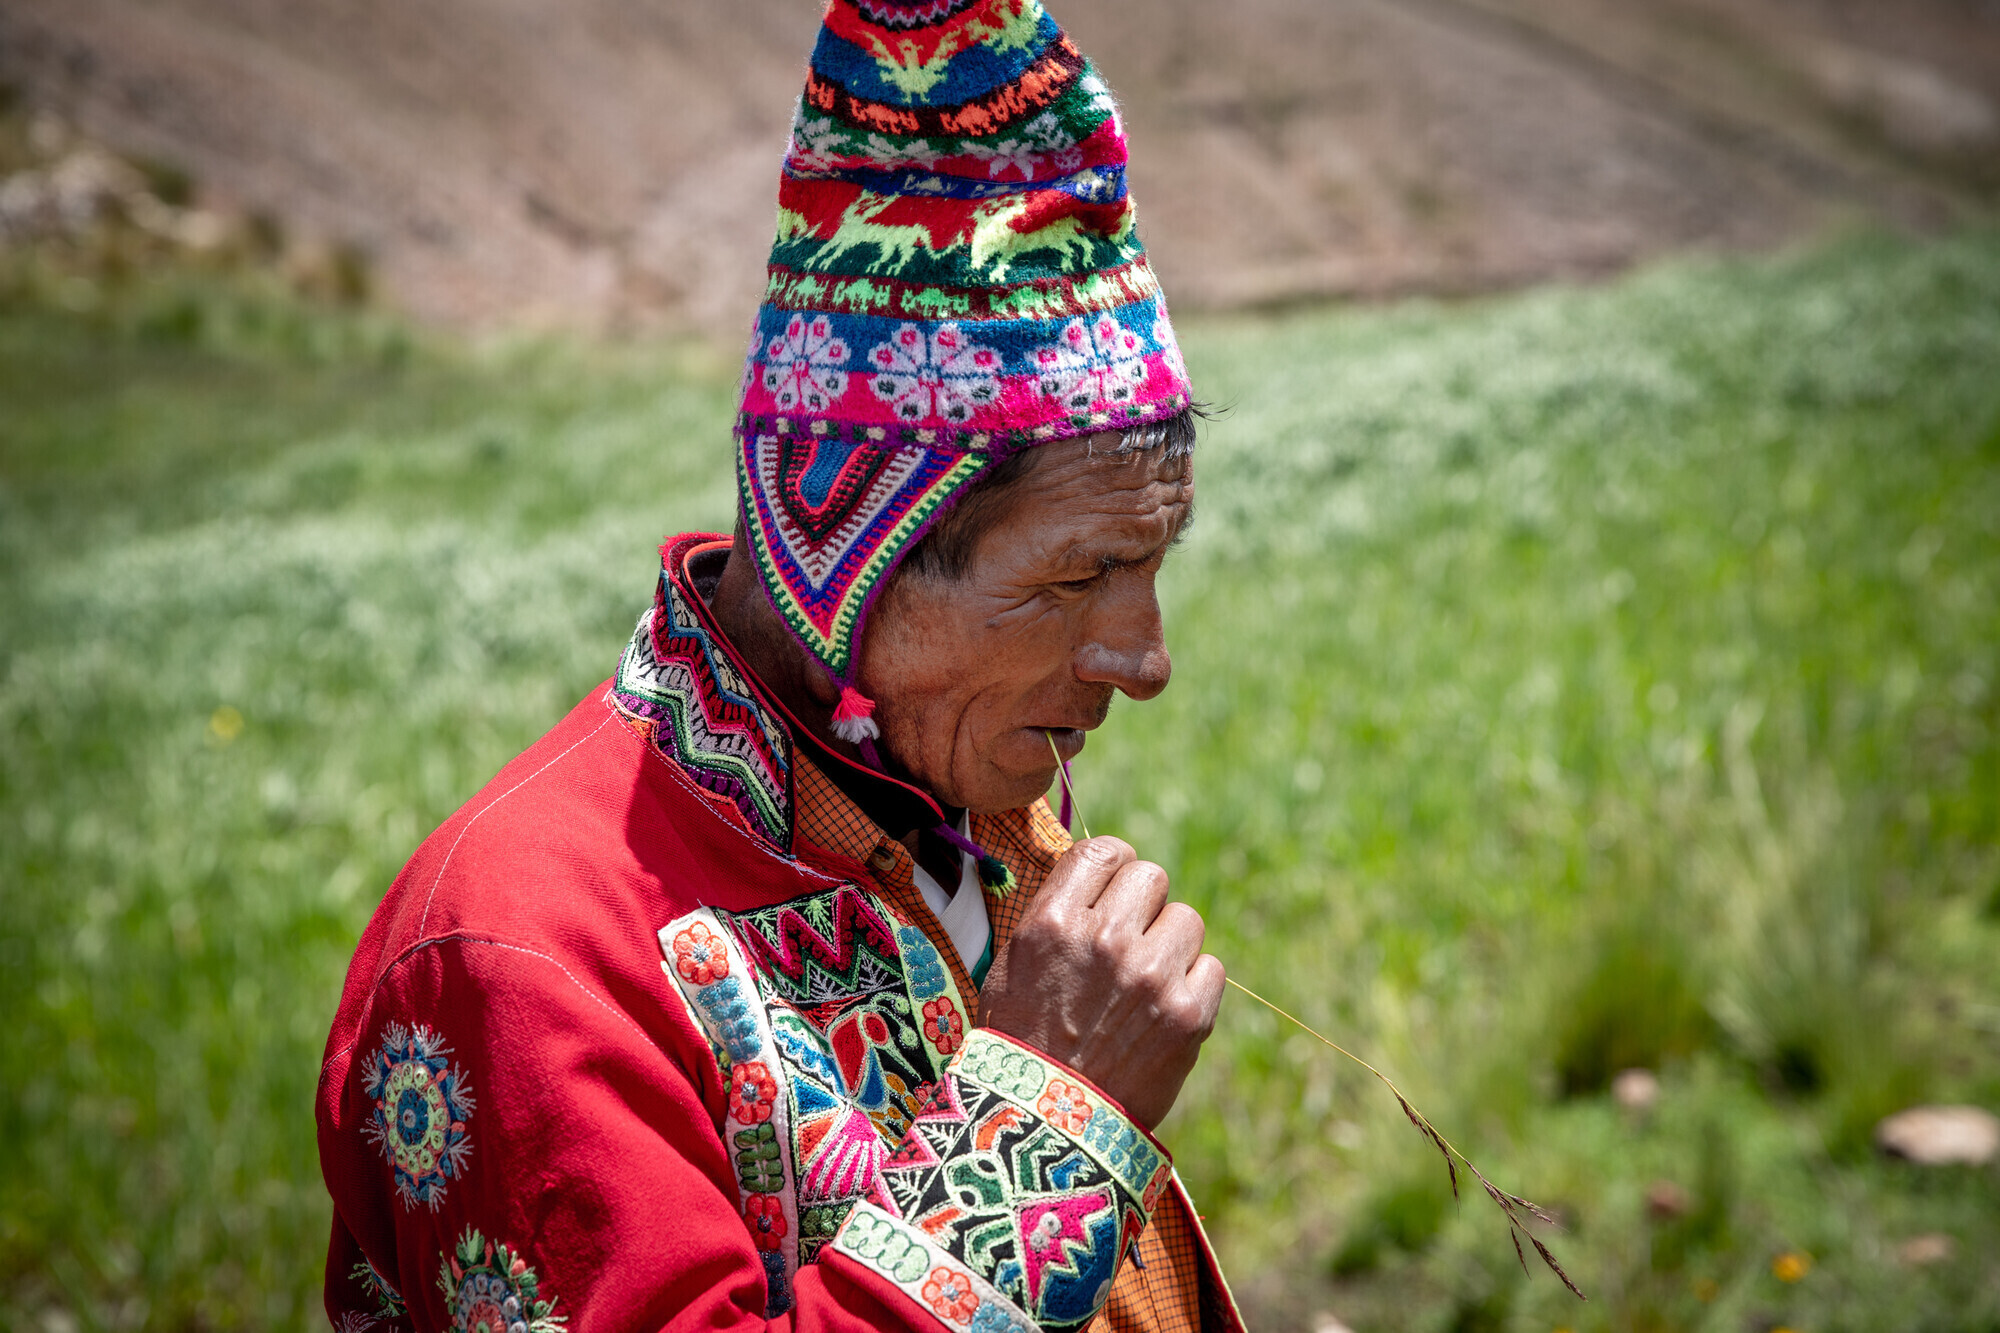 An Indigenous Bolivian man in a colorful, pointy hat and red embroidered jacket. He is chewing on a piece of long grass.